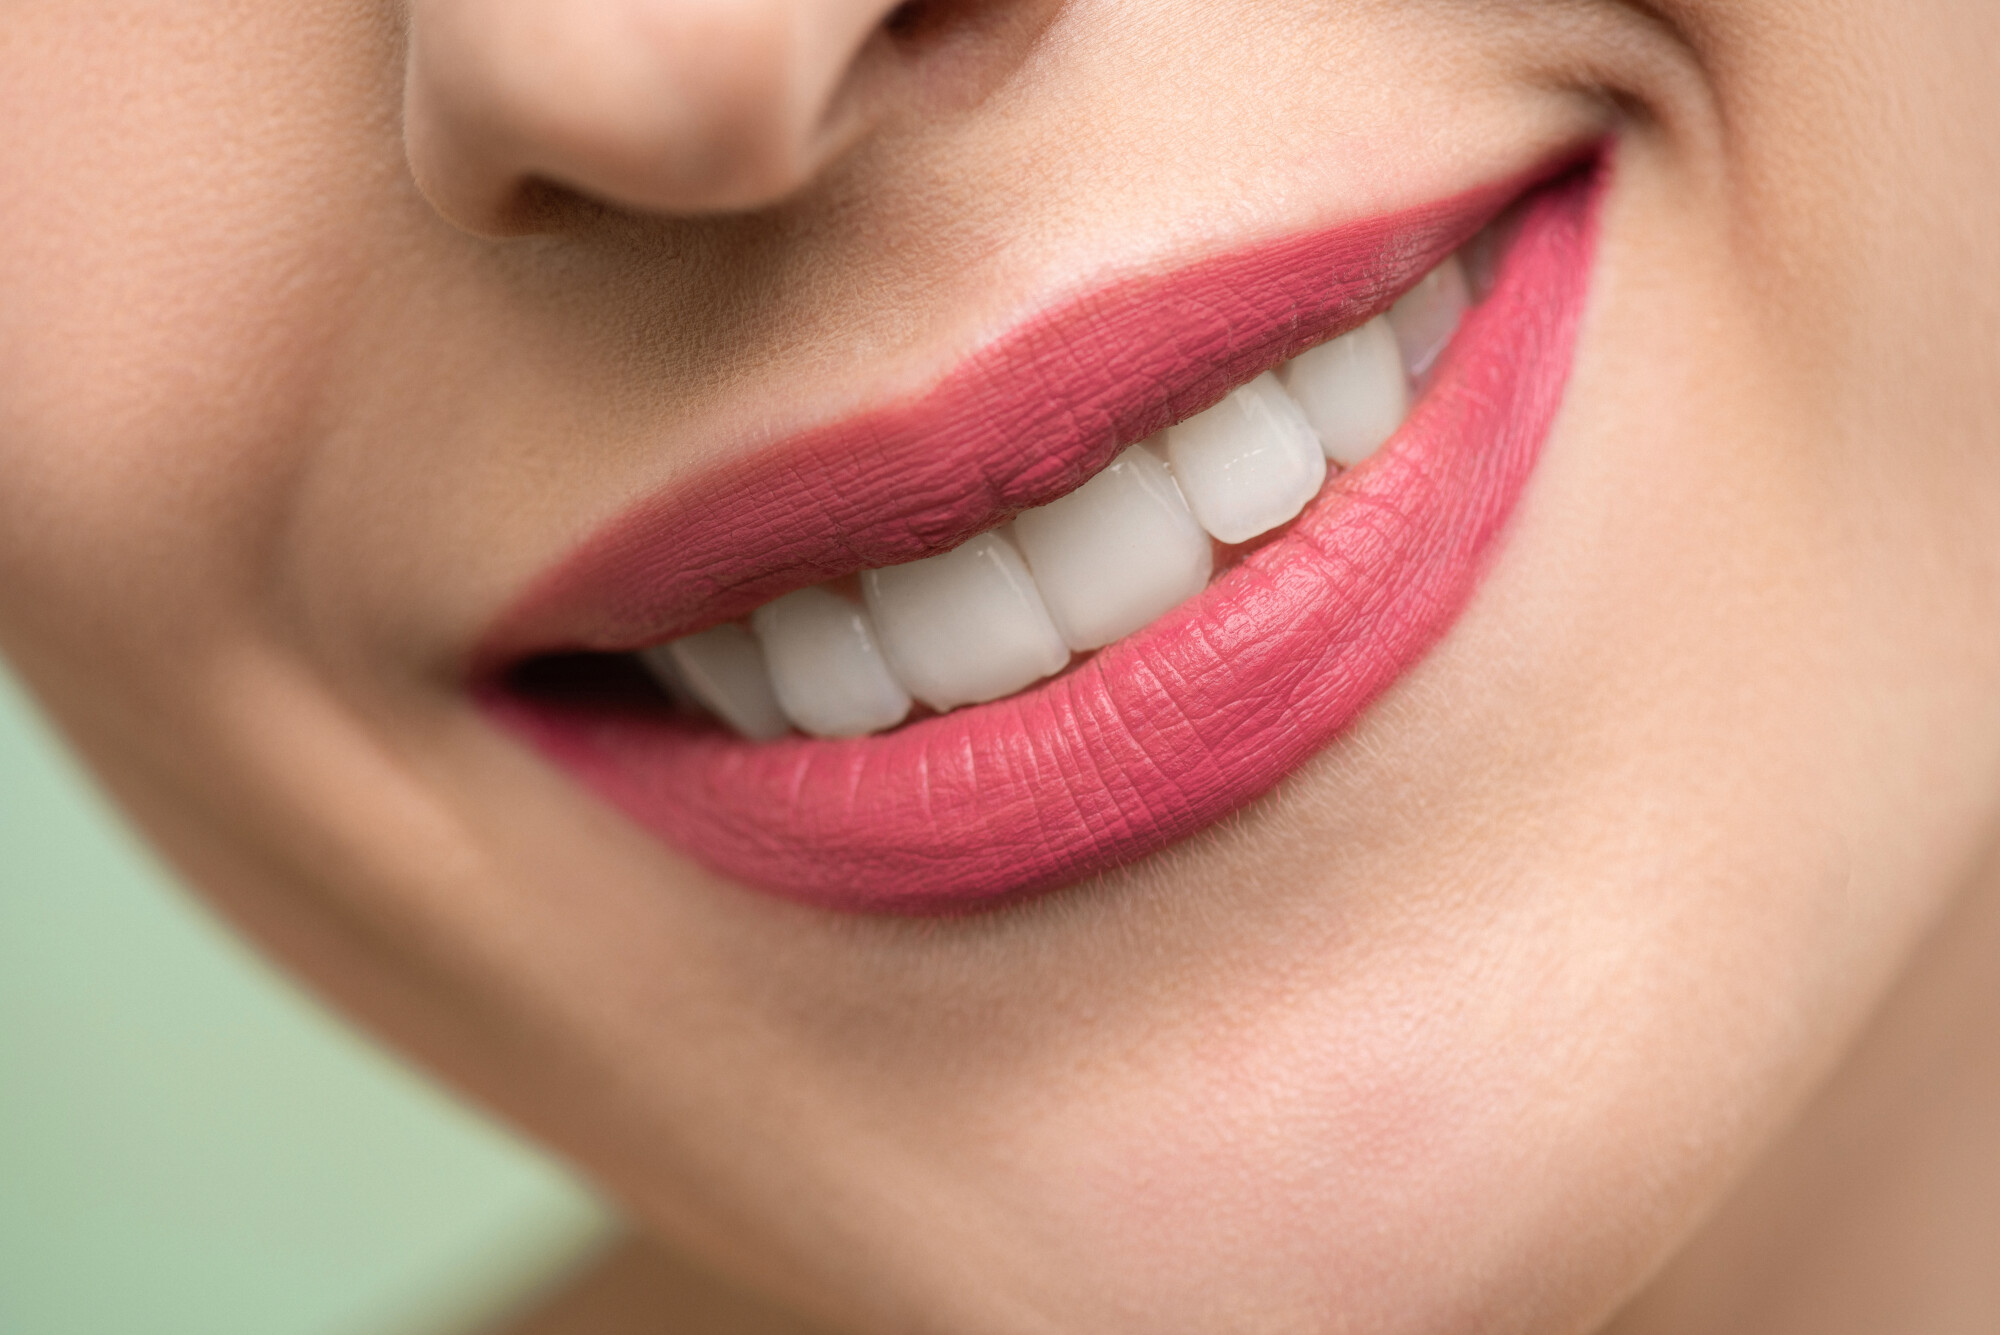 How to Get Perfect Teeth: 4 Effective Tips